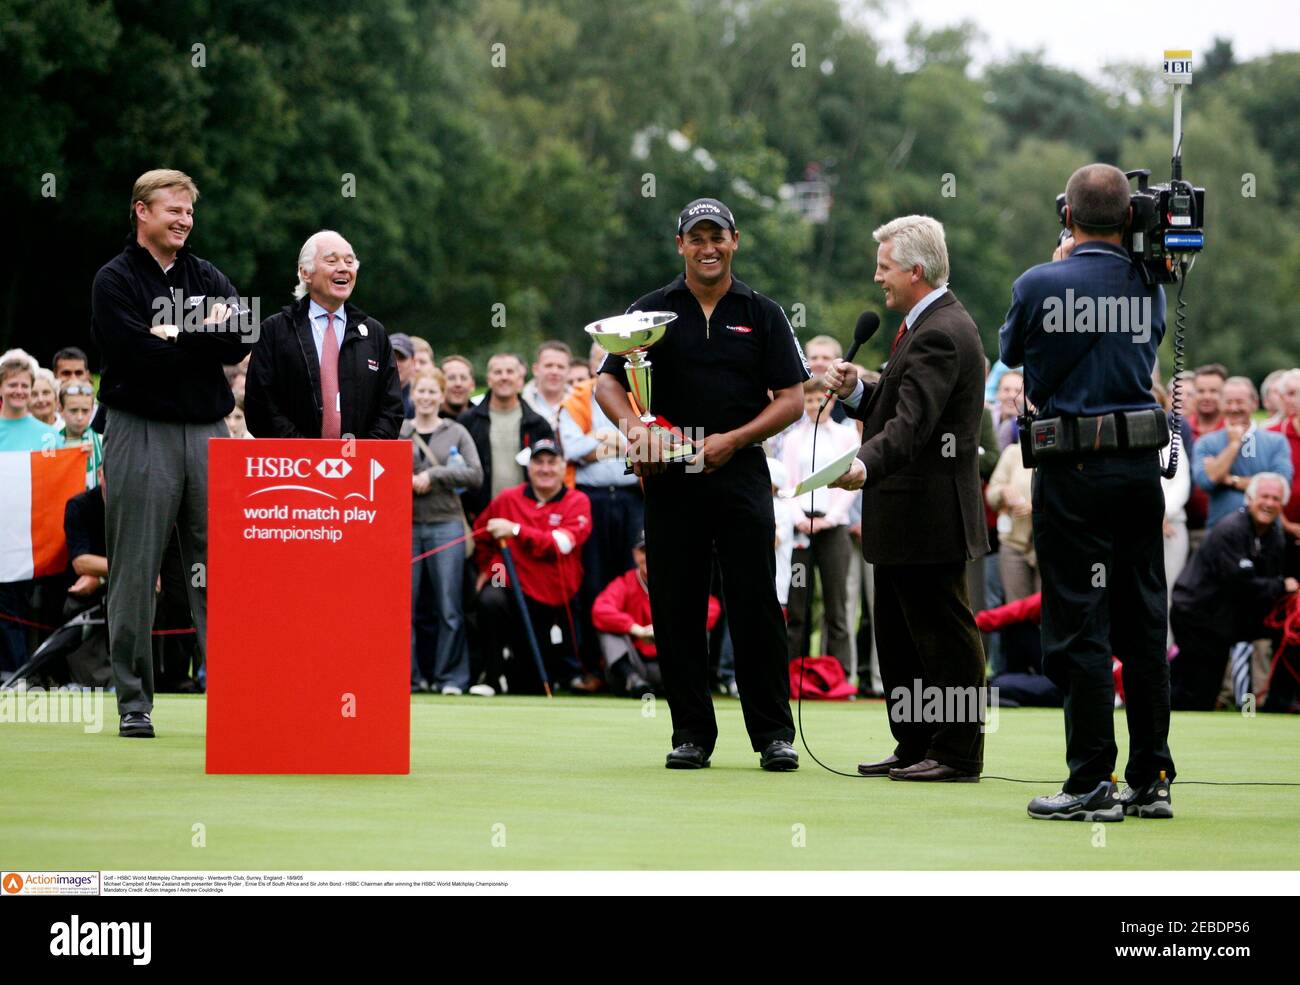 Golf - HSBC World Matchplay Championship - Wentworth Club, Surrey, England  - 18/9/05 Michael Campbell of New Zealand with presenter Steve Ryder ,  Ernie Els of South Africa and Sir John Bond -